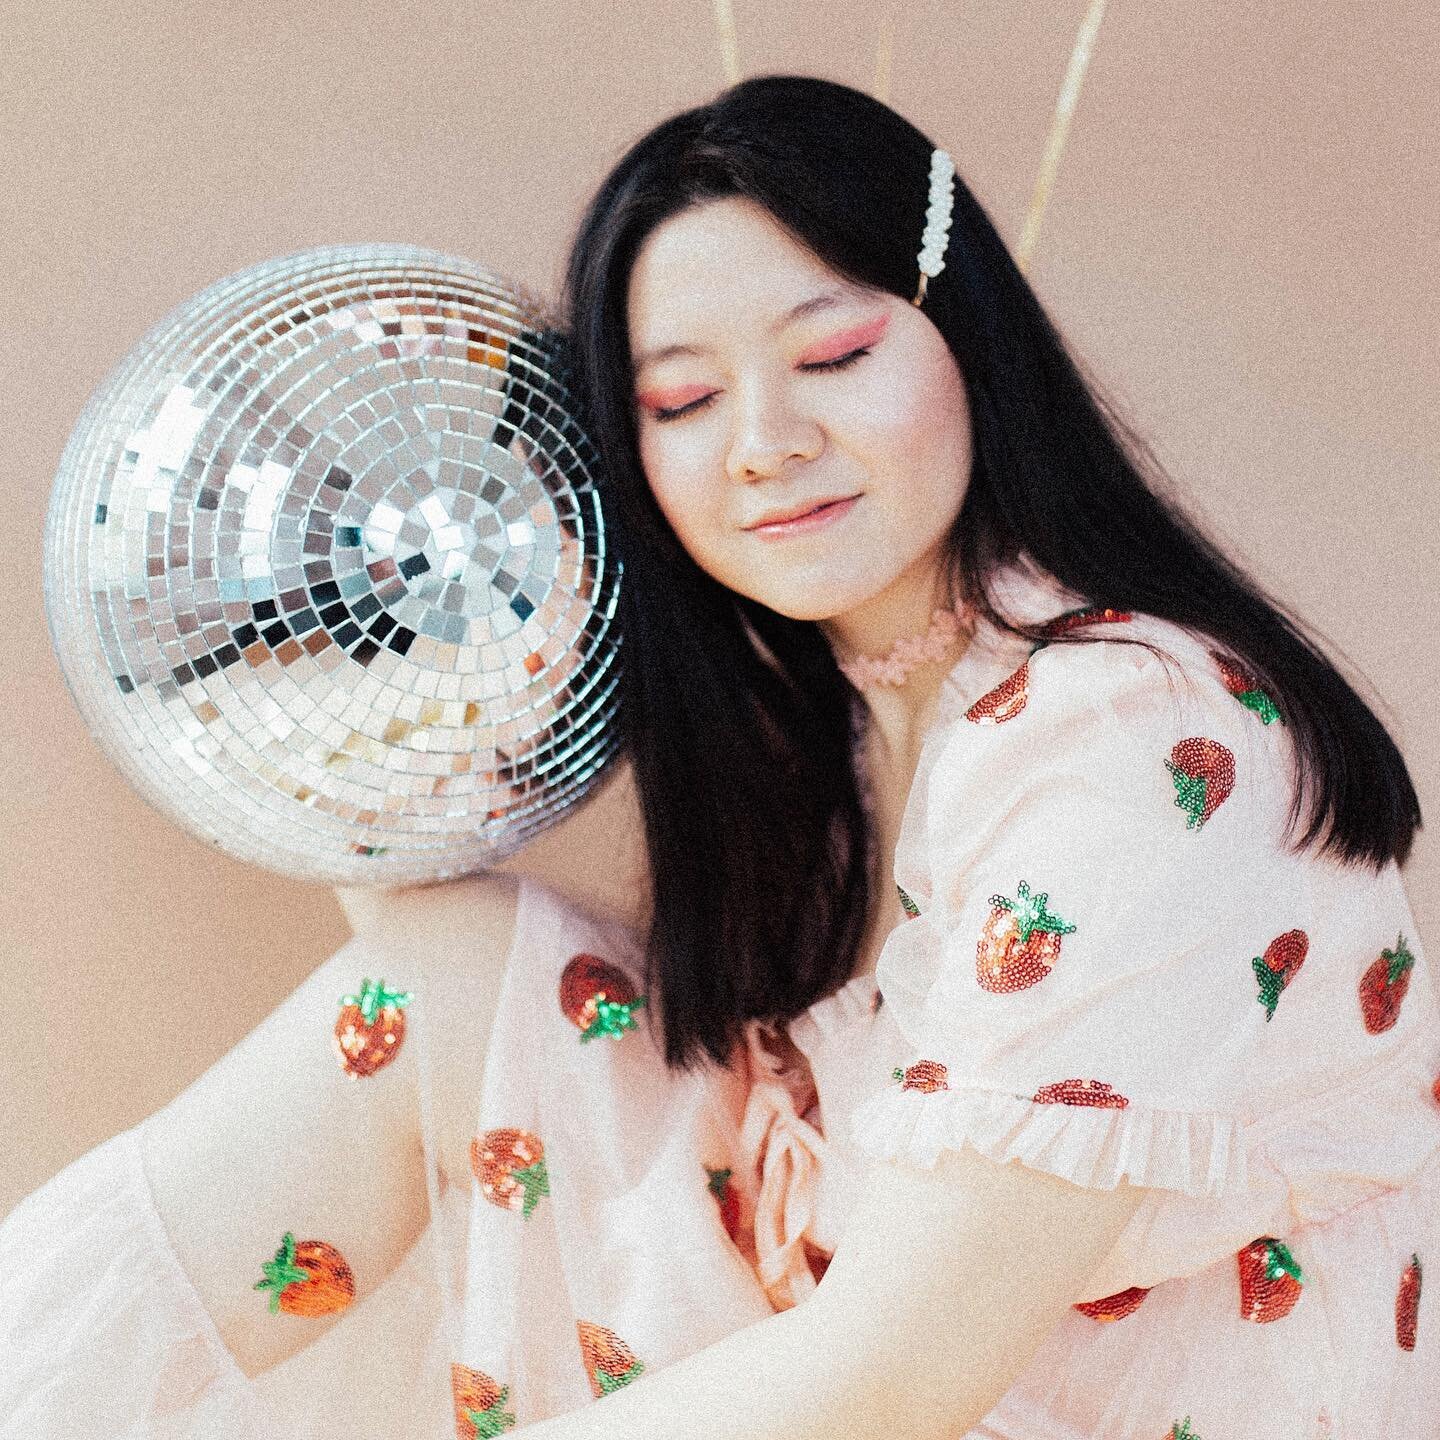 I will never get over the disco ball trend 🌐
&bull;
&bull;
&bull;
&bull;
&bull;
&bull;
#wedding #weddings #arizona #arizonaweddings #az #azwedding #phoenix #phoenixwedding #phoenixweddings #weddingphotography #weddingphotographer #arizonaphotographe